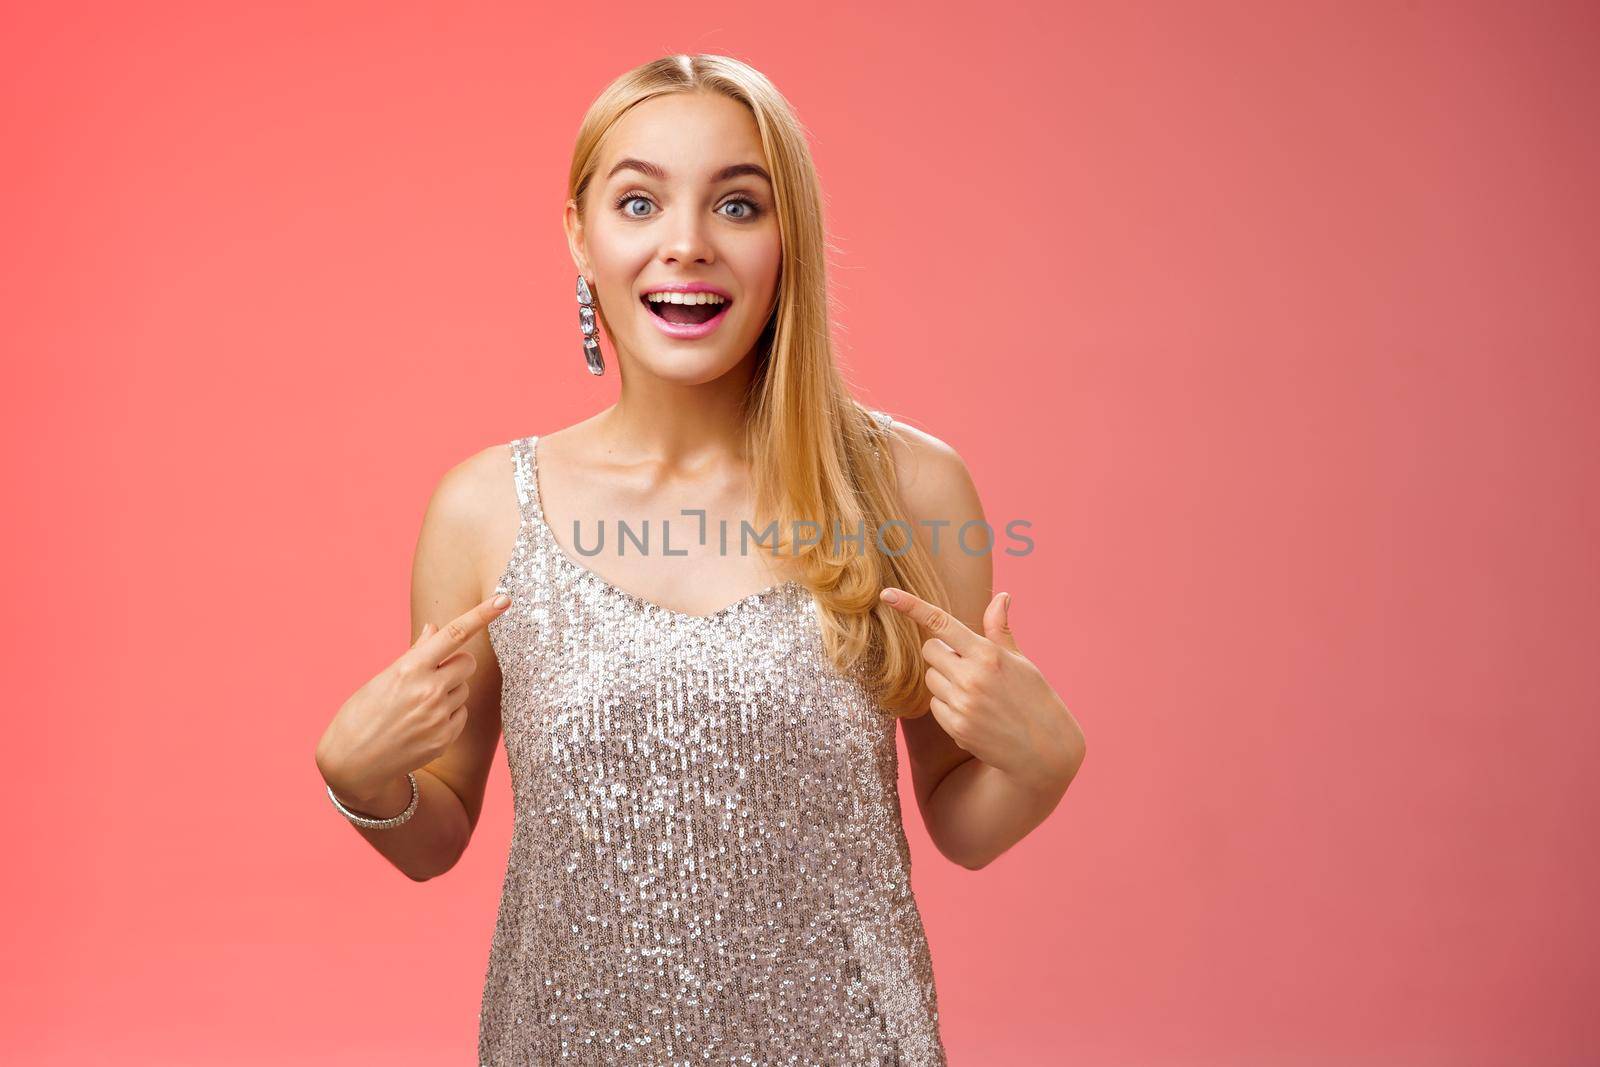 Surprised wondered happy blond charming cheerful woman in glittering silver dress pointing herself amused thrilled picked be chosen participate awesome event, standing joyful red background.